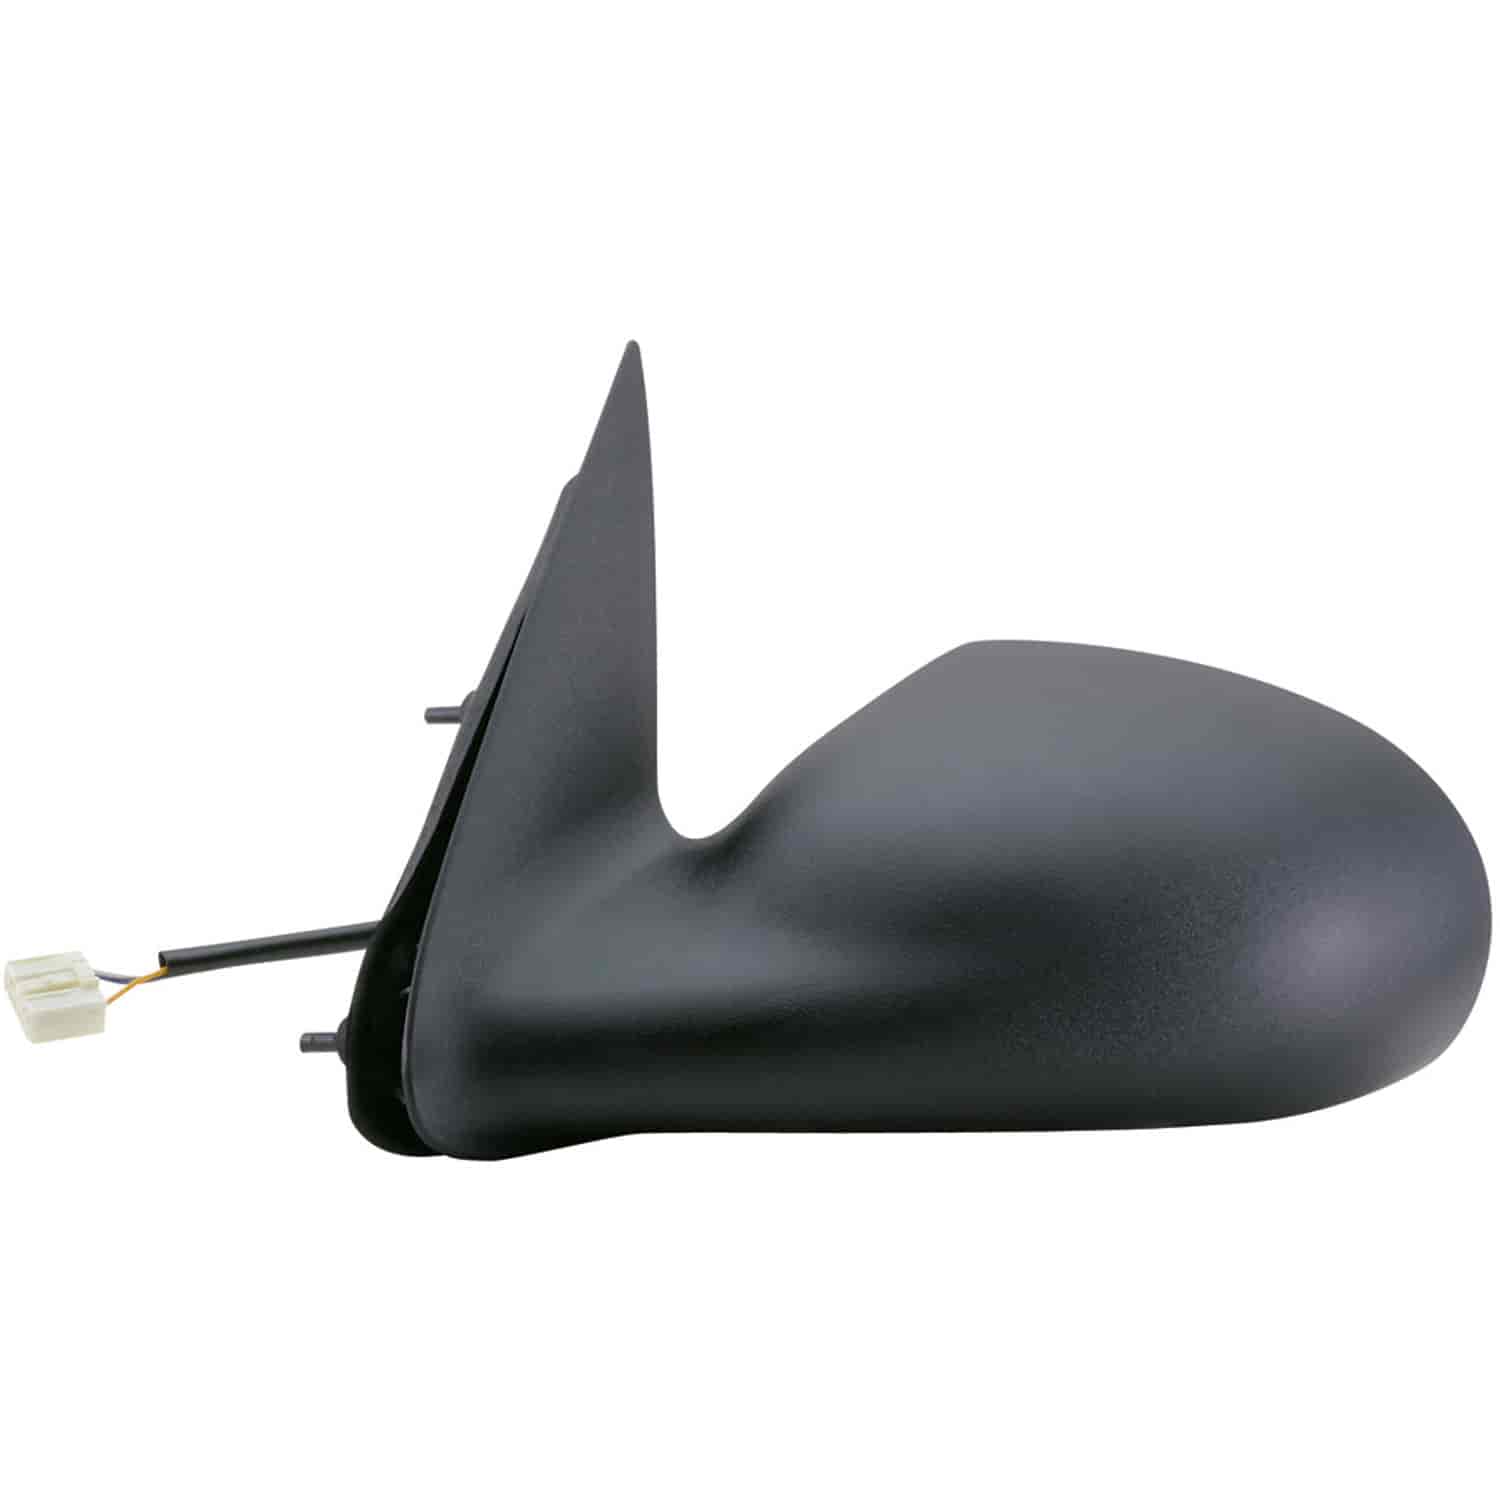 OEM Style Replacement mirror for 03 Chrysler PT Cruiser driver side mirror tested to fit and functio